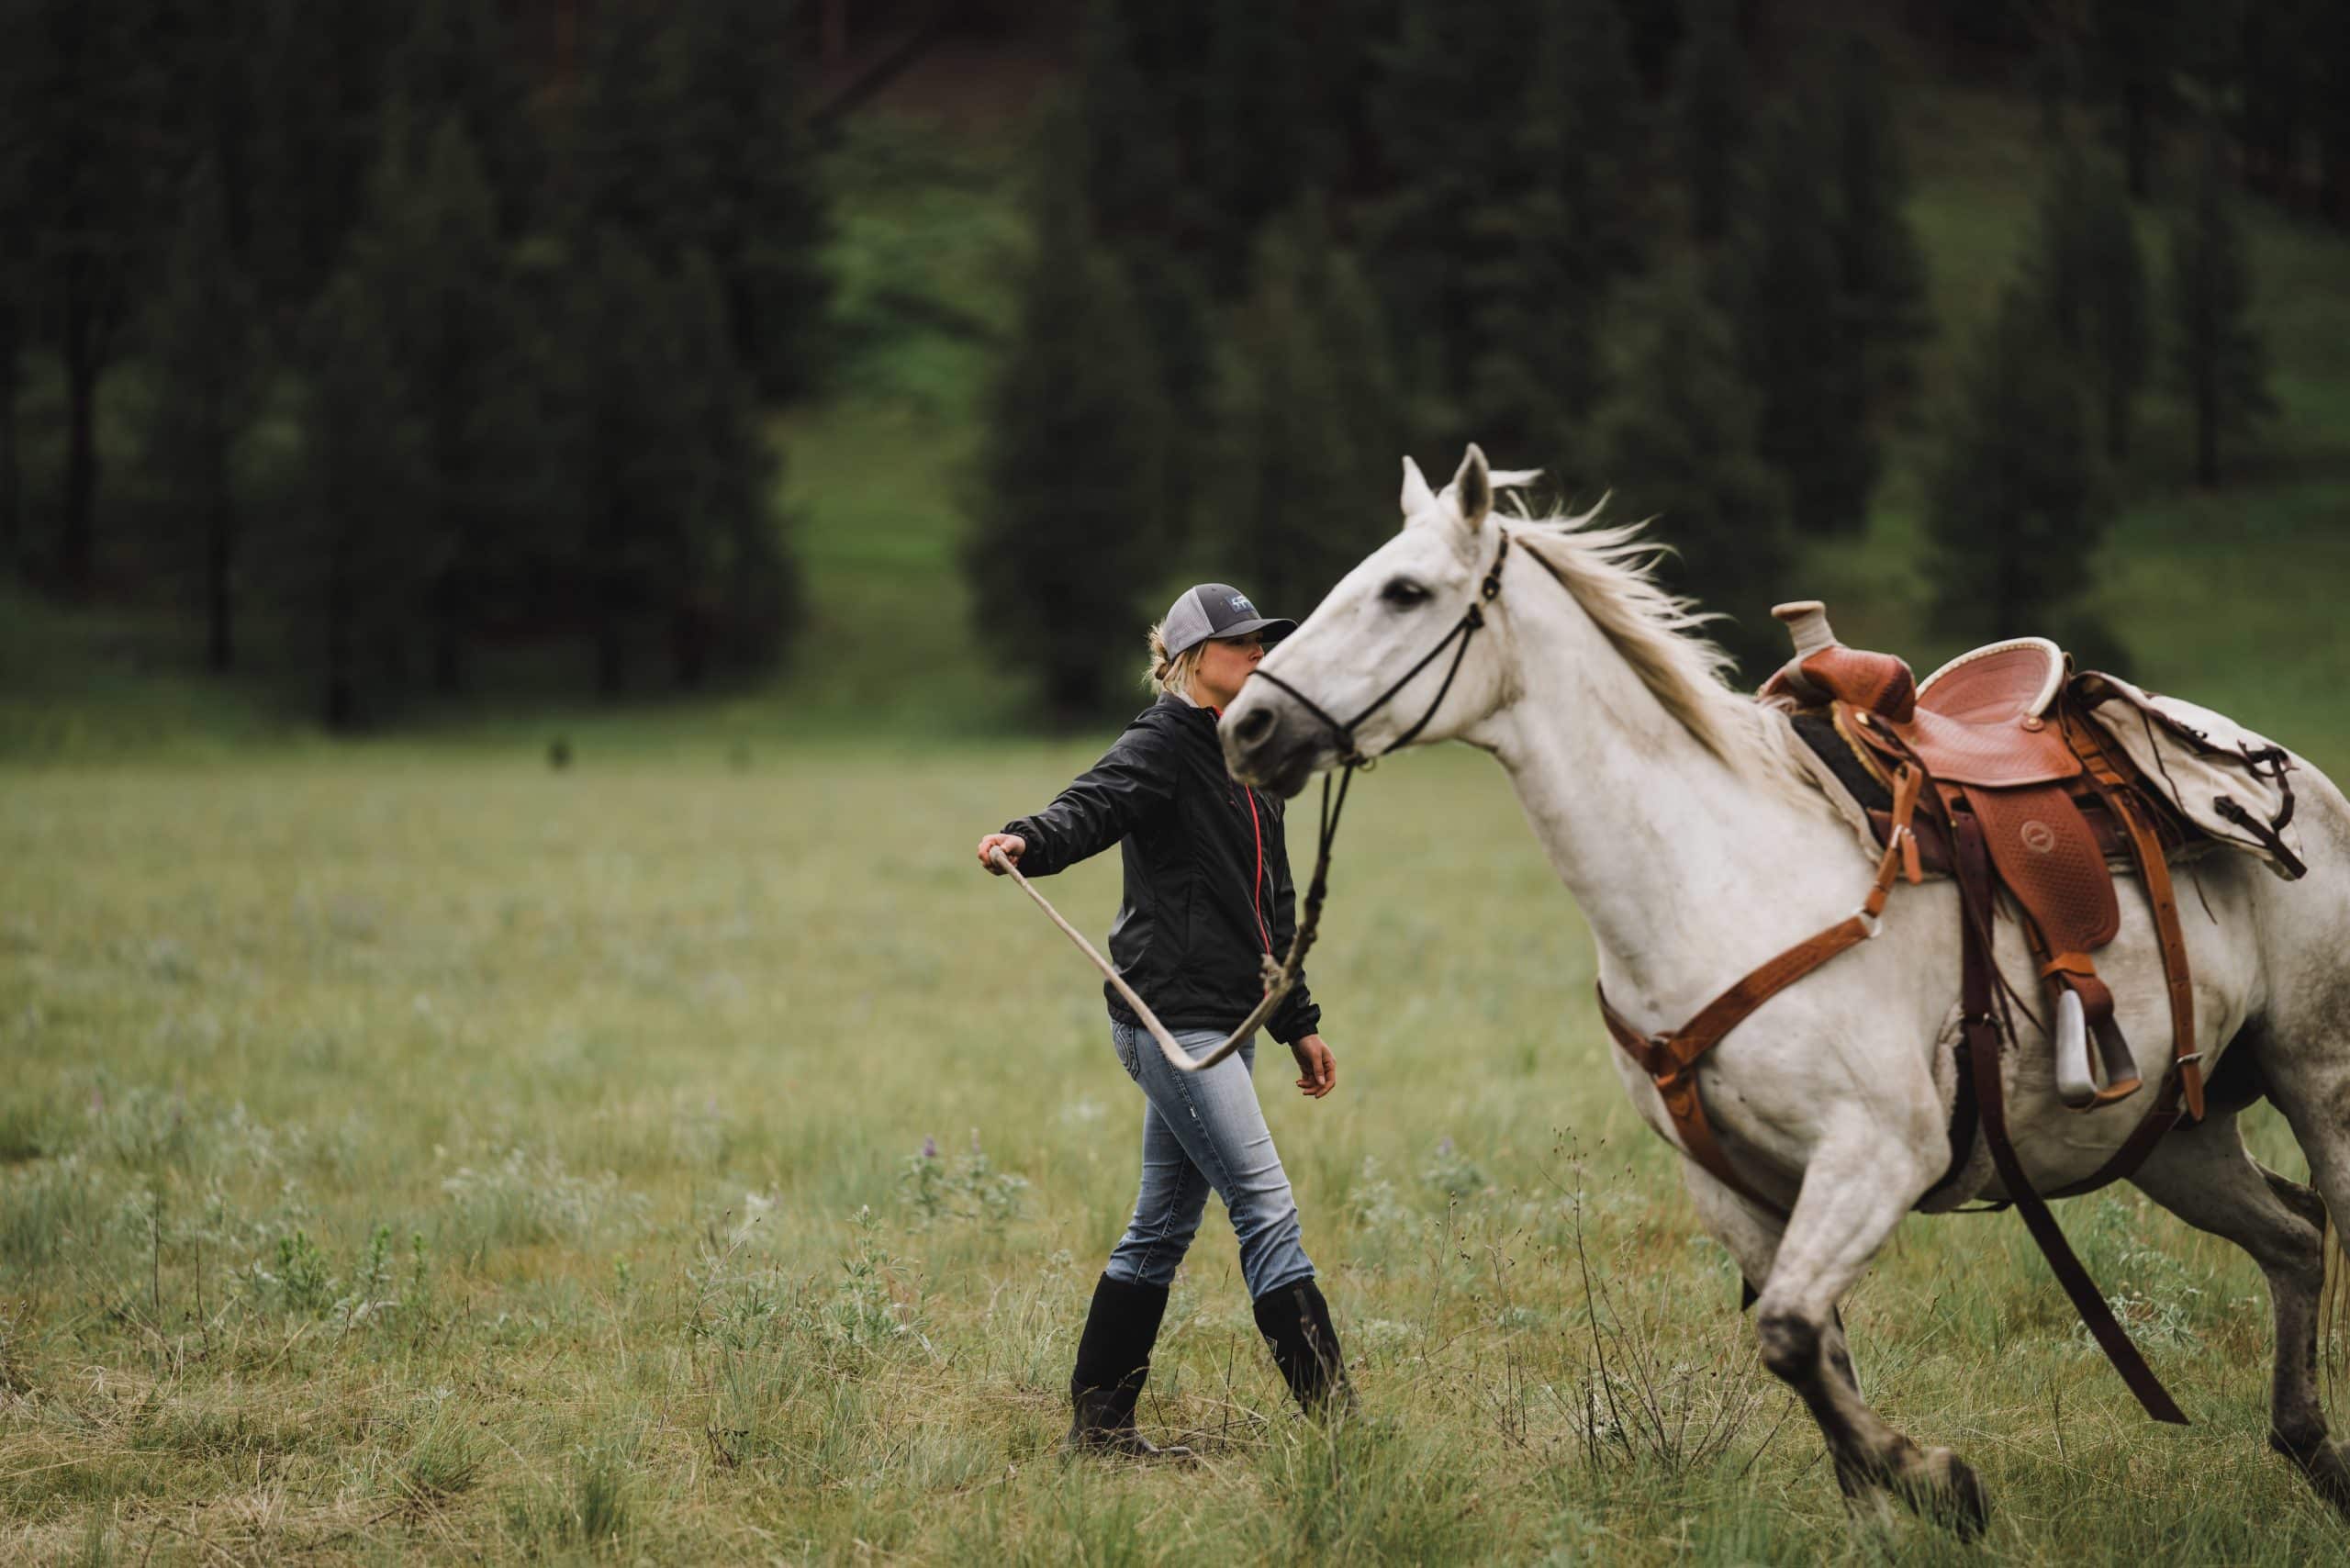 A shed hunter leads her excited horse around the grass before the start of the shed hunt.